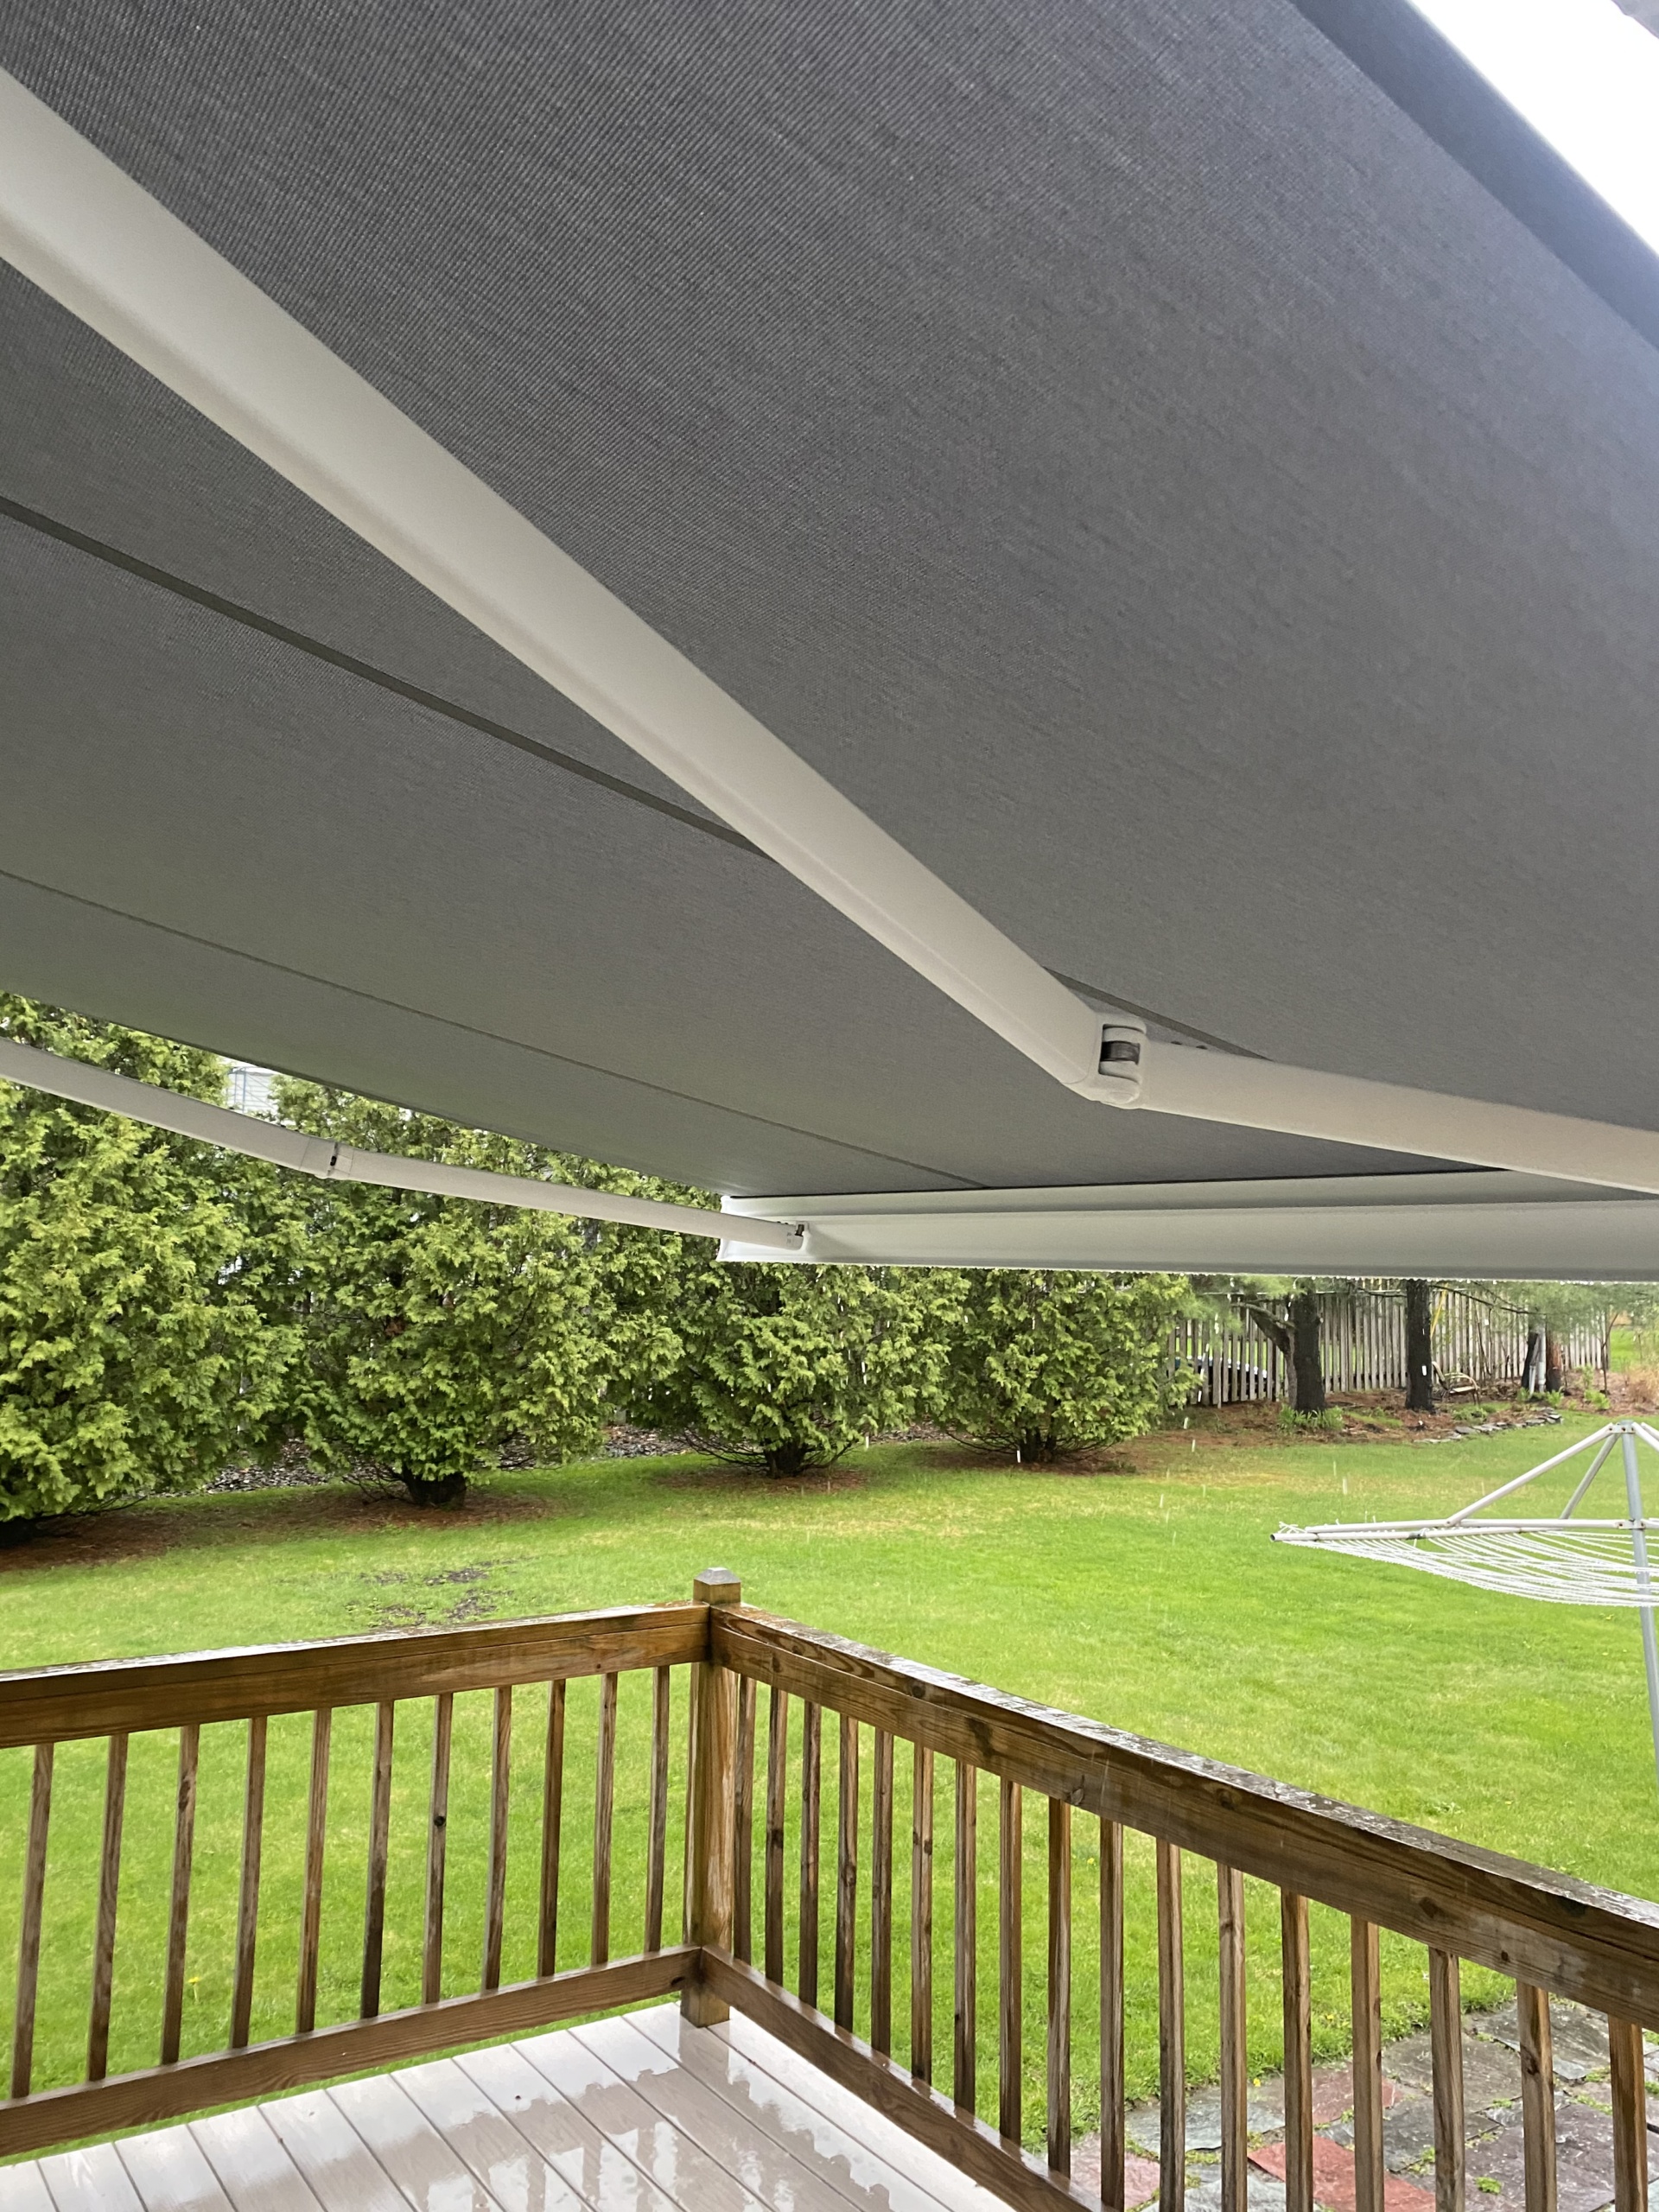 Cassette awning over a back deck.